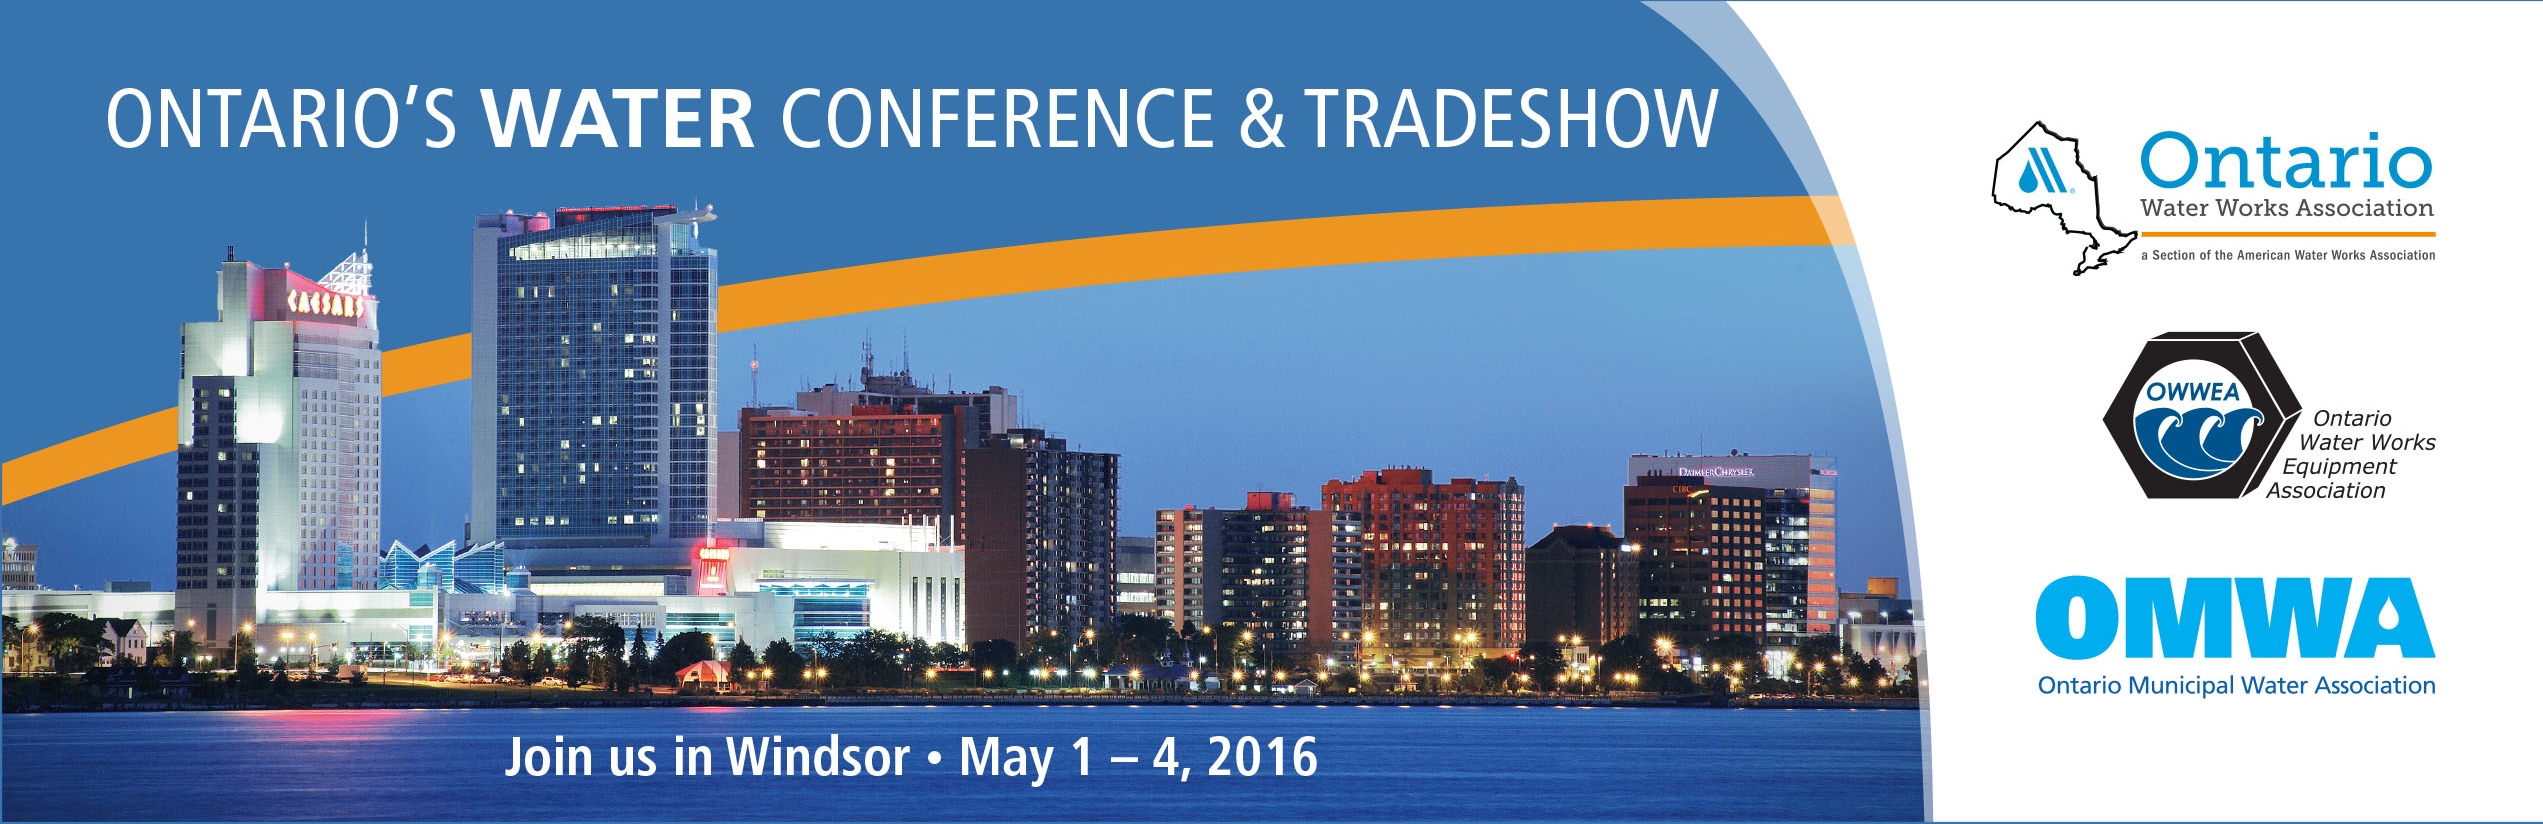 Ontario's Water Conference & Trade Show 2016